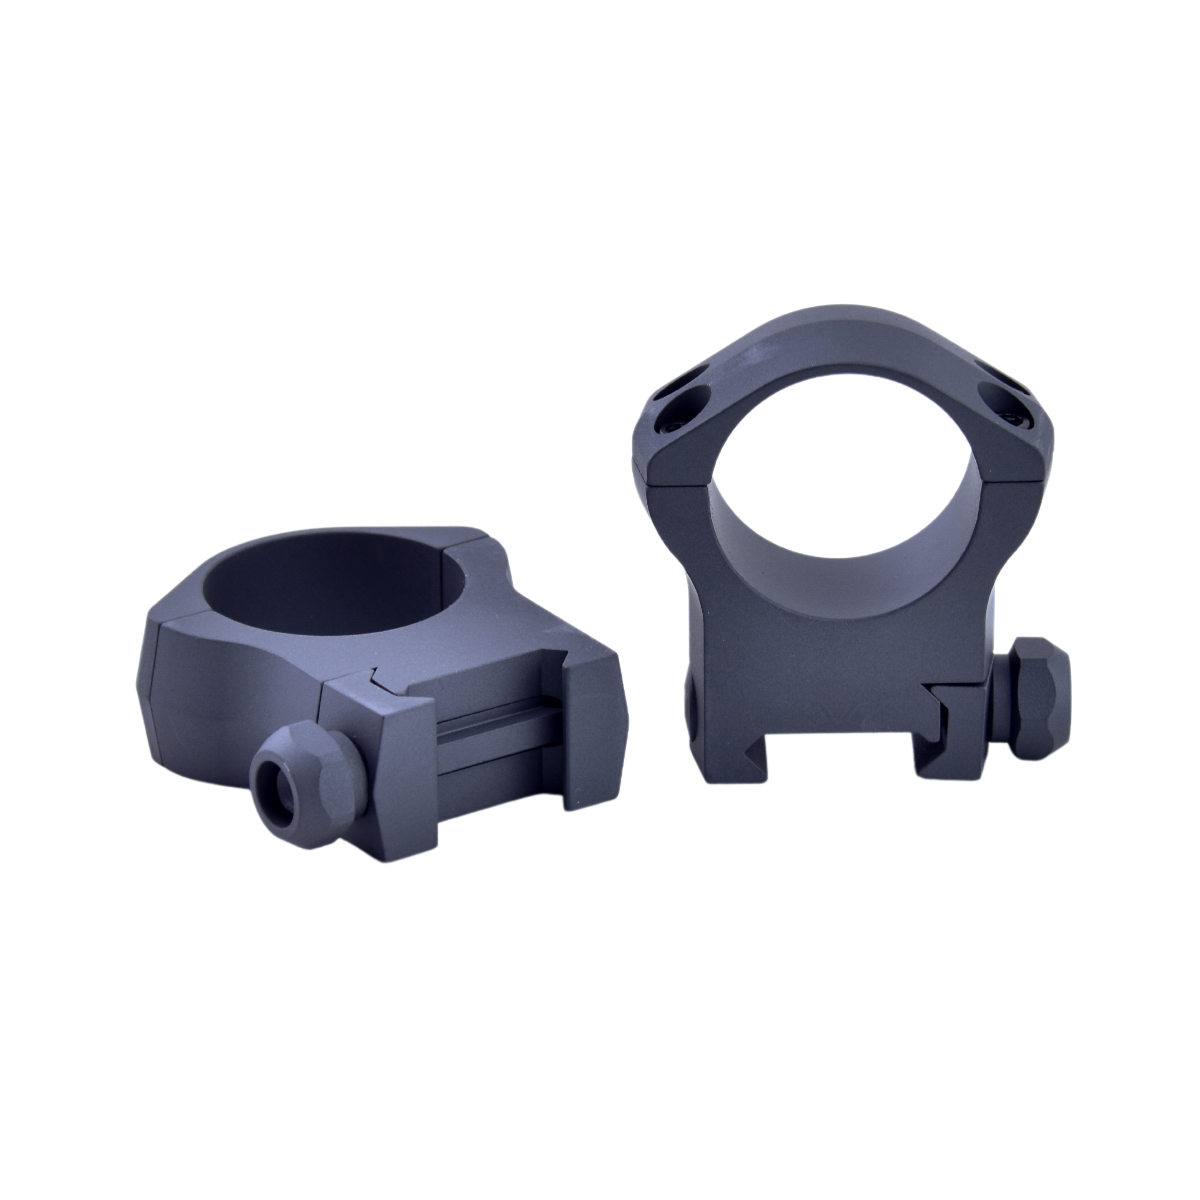 Warne Mountain Tech 30mm, High Height Sniper Grey Rings matches TORIC scopes